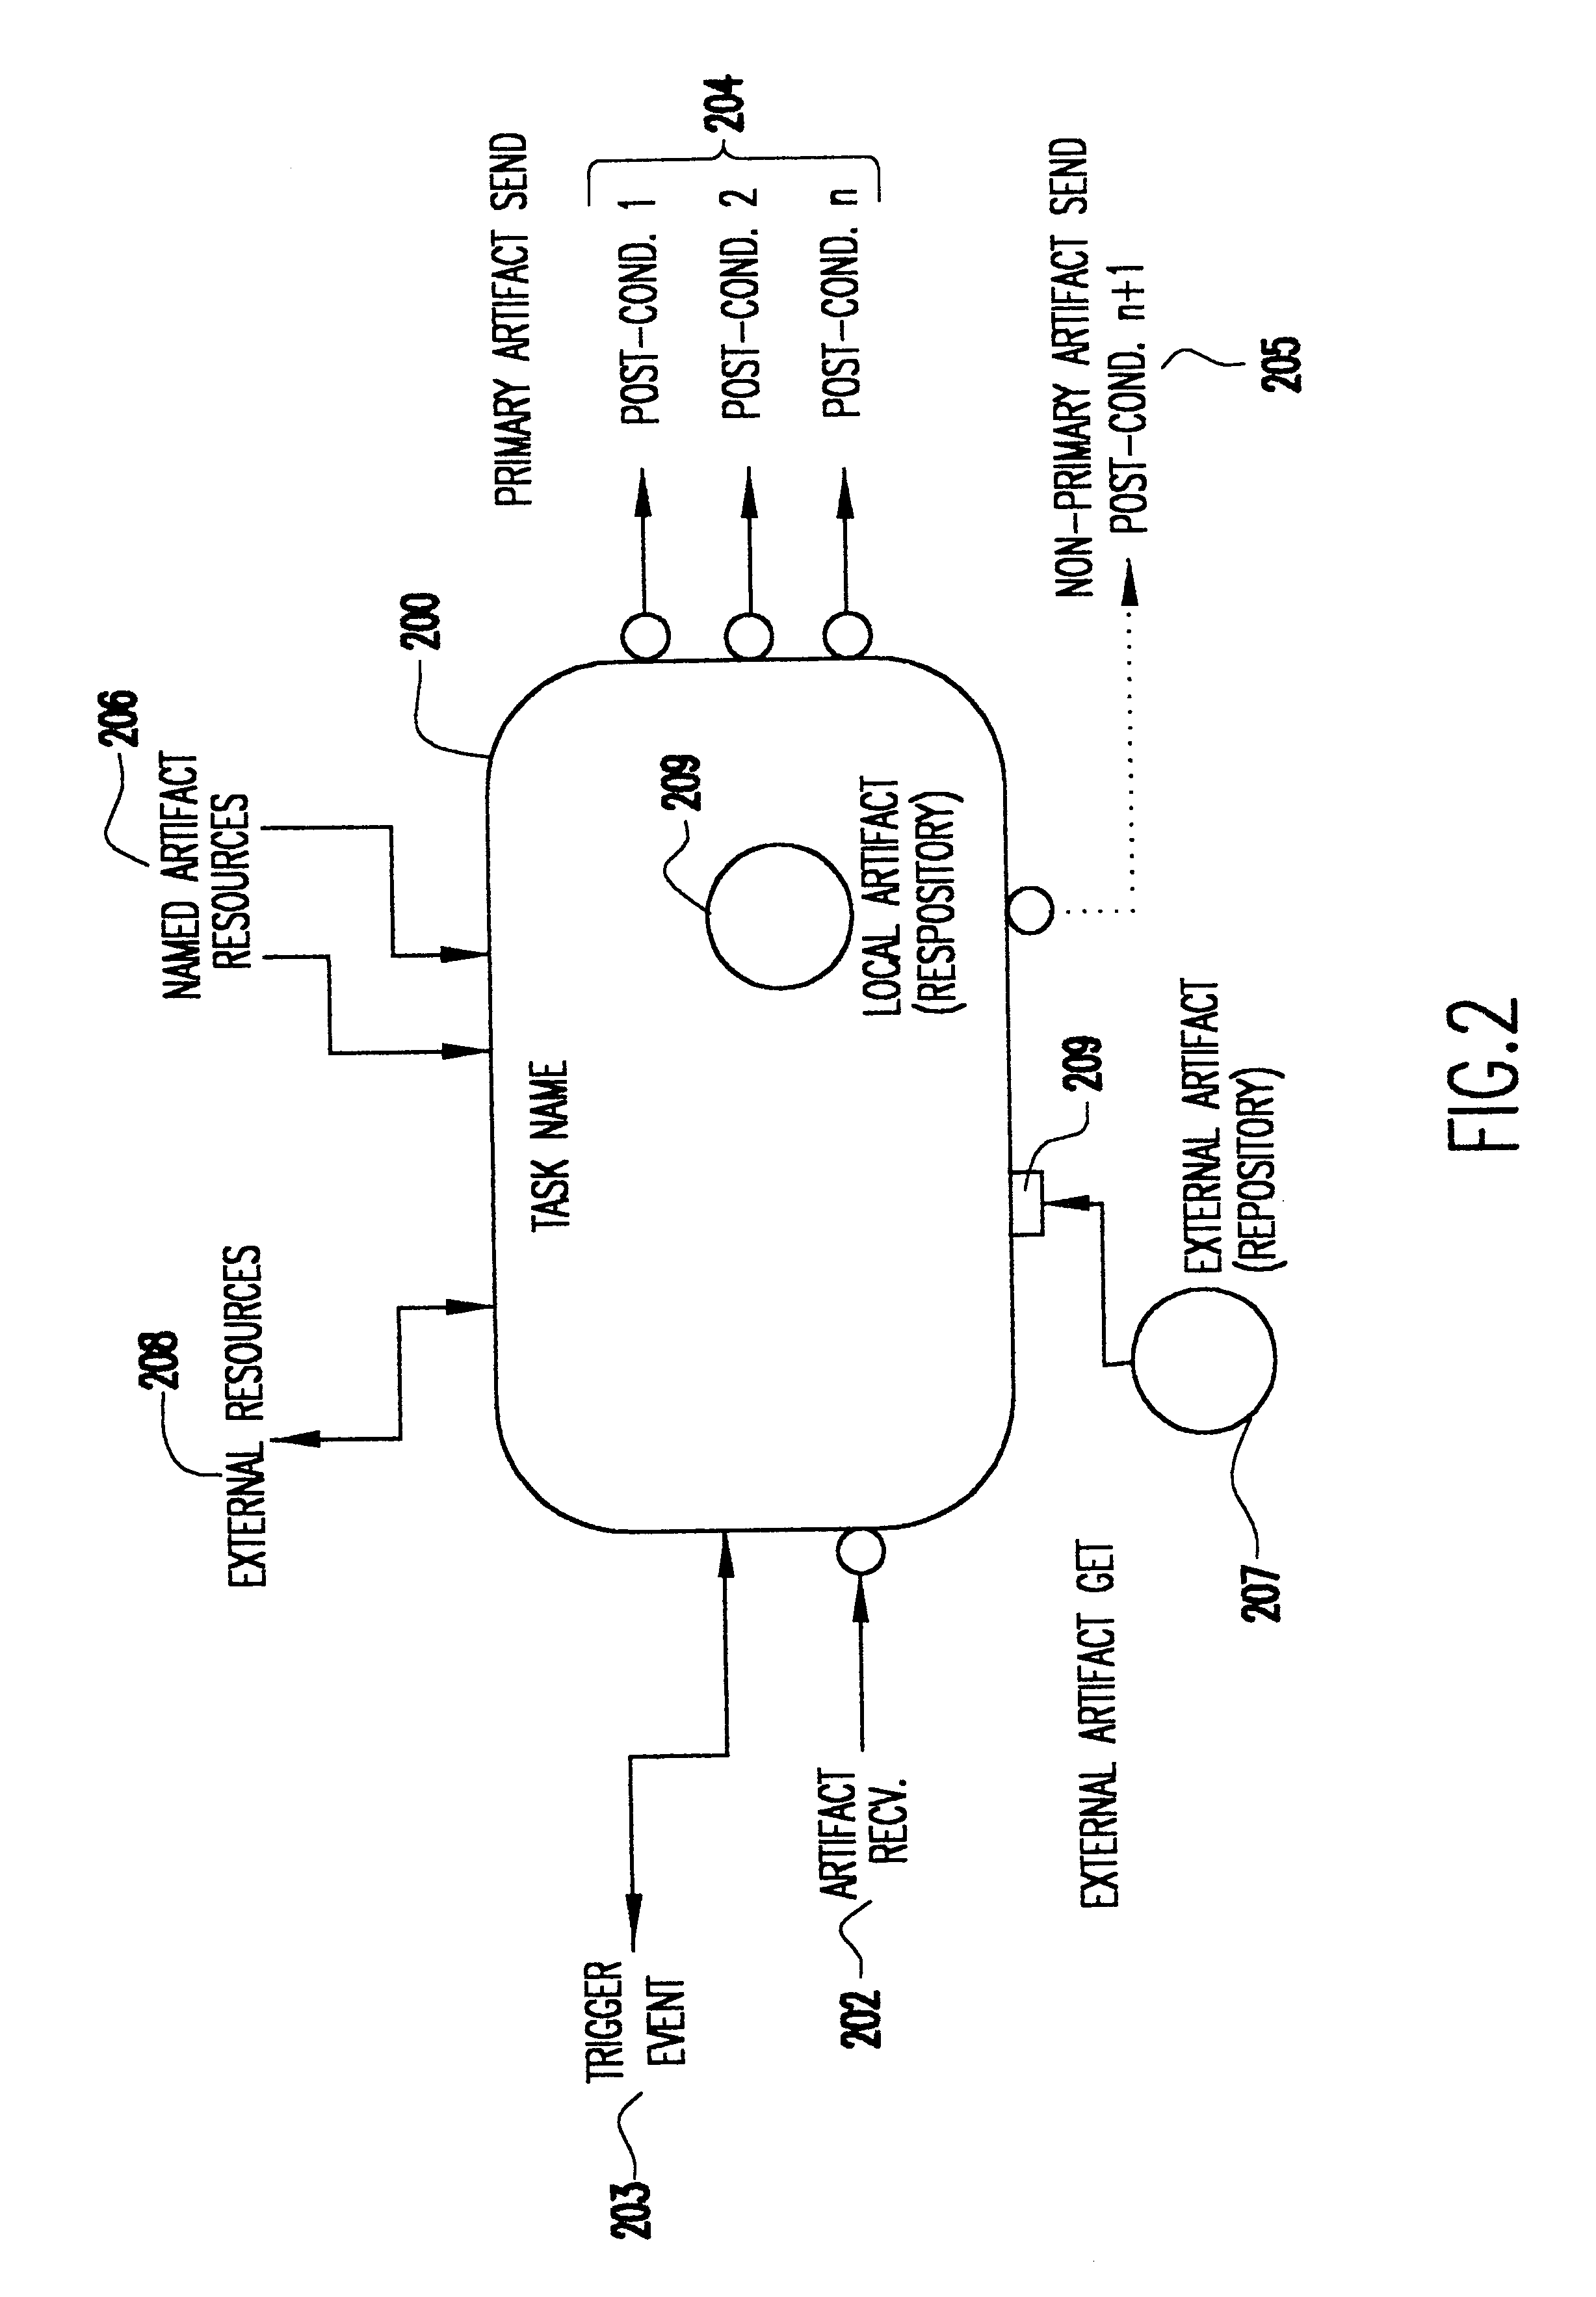 Method and system for specifying and implementing automation of business processes